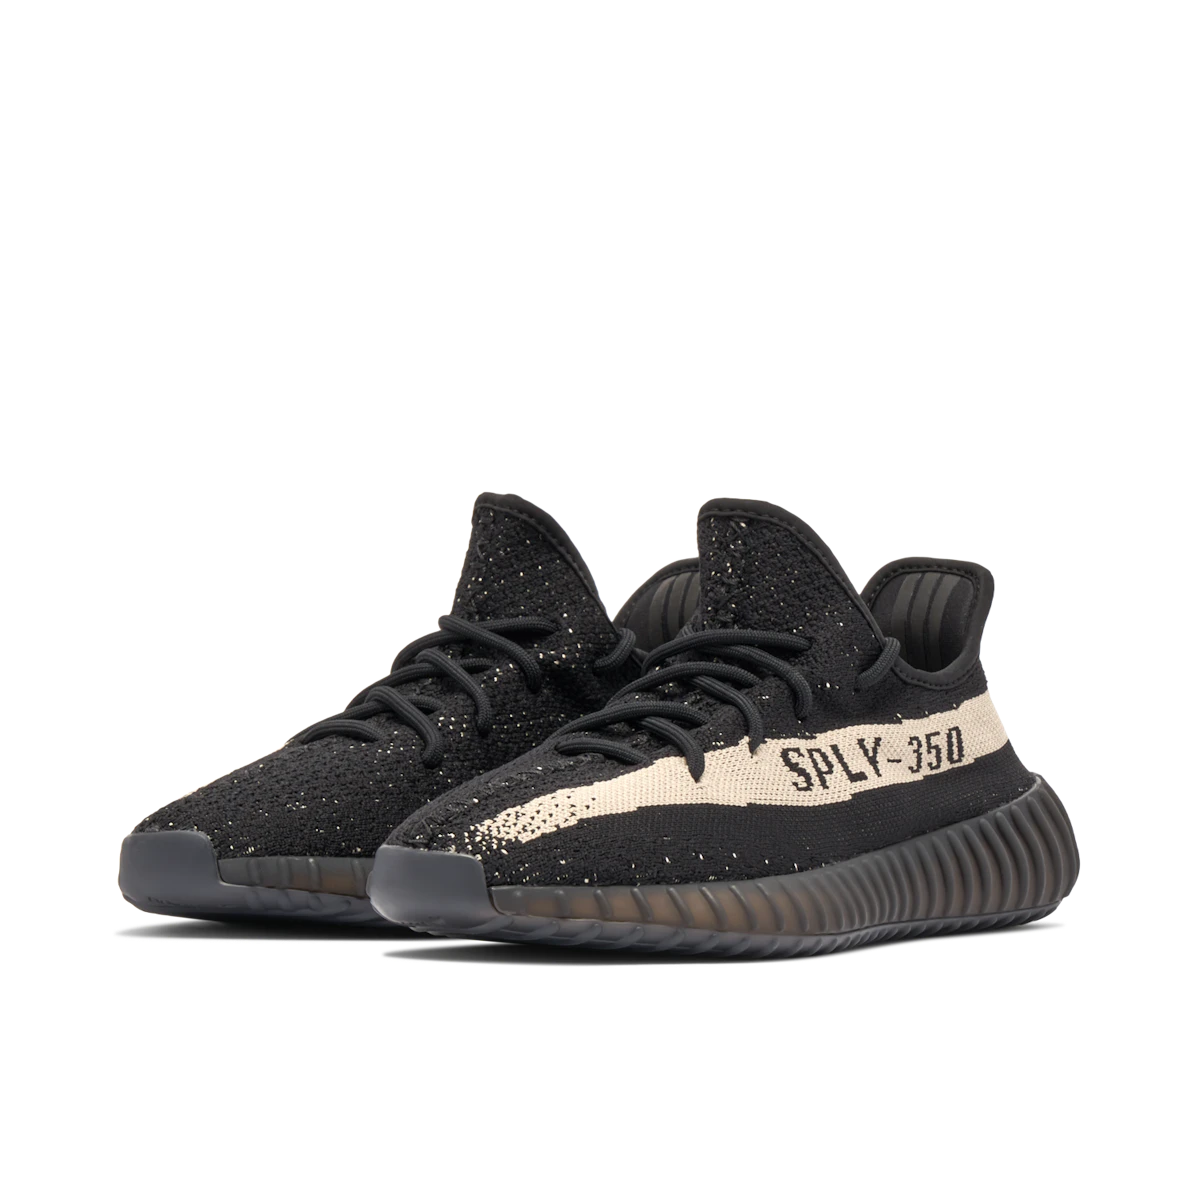 Adidas Yeezy Boost 350 V2 Core Black White Oreo by Yeezy from £375.00